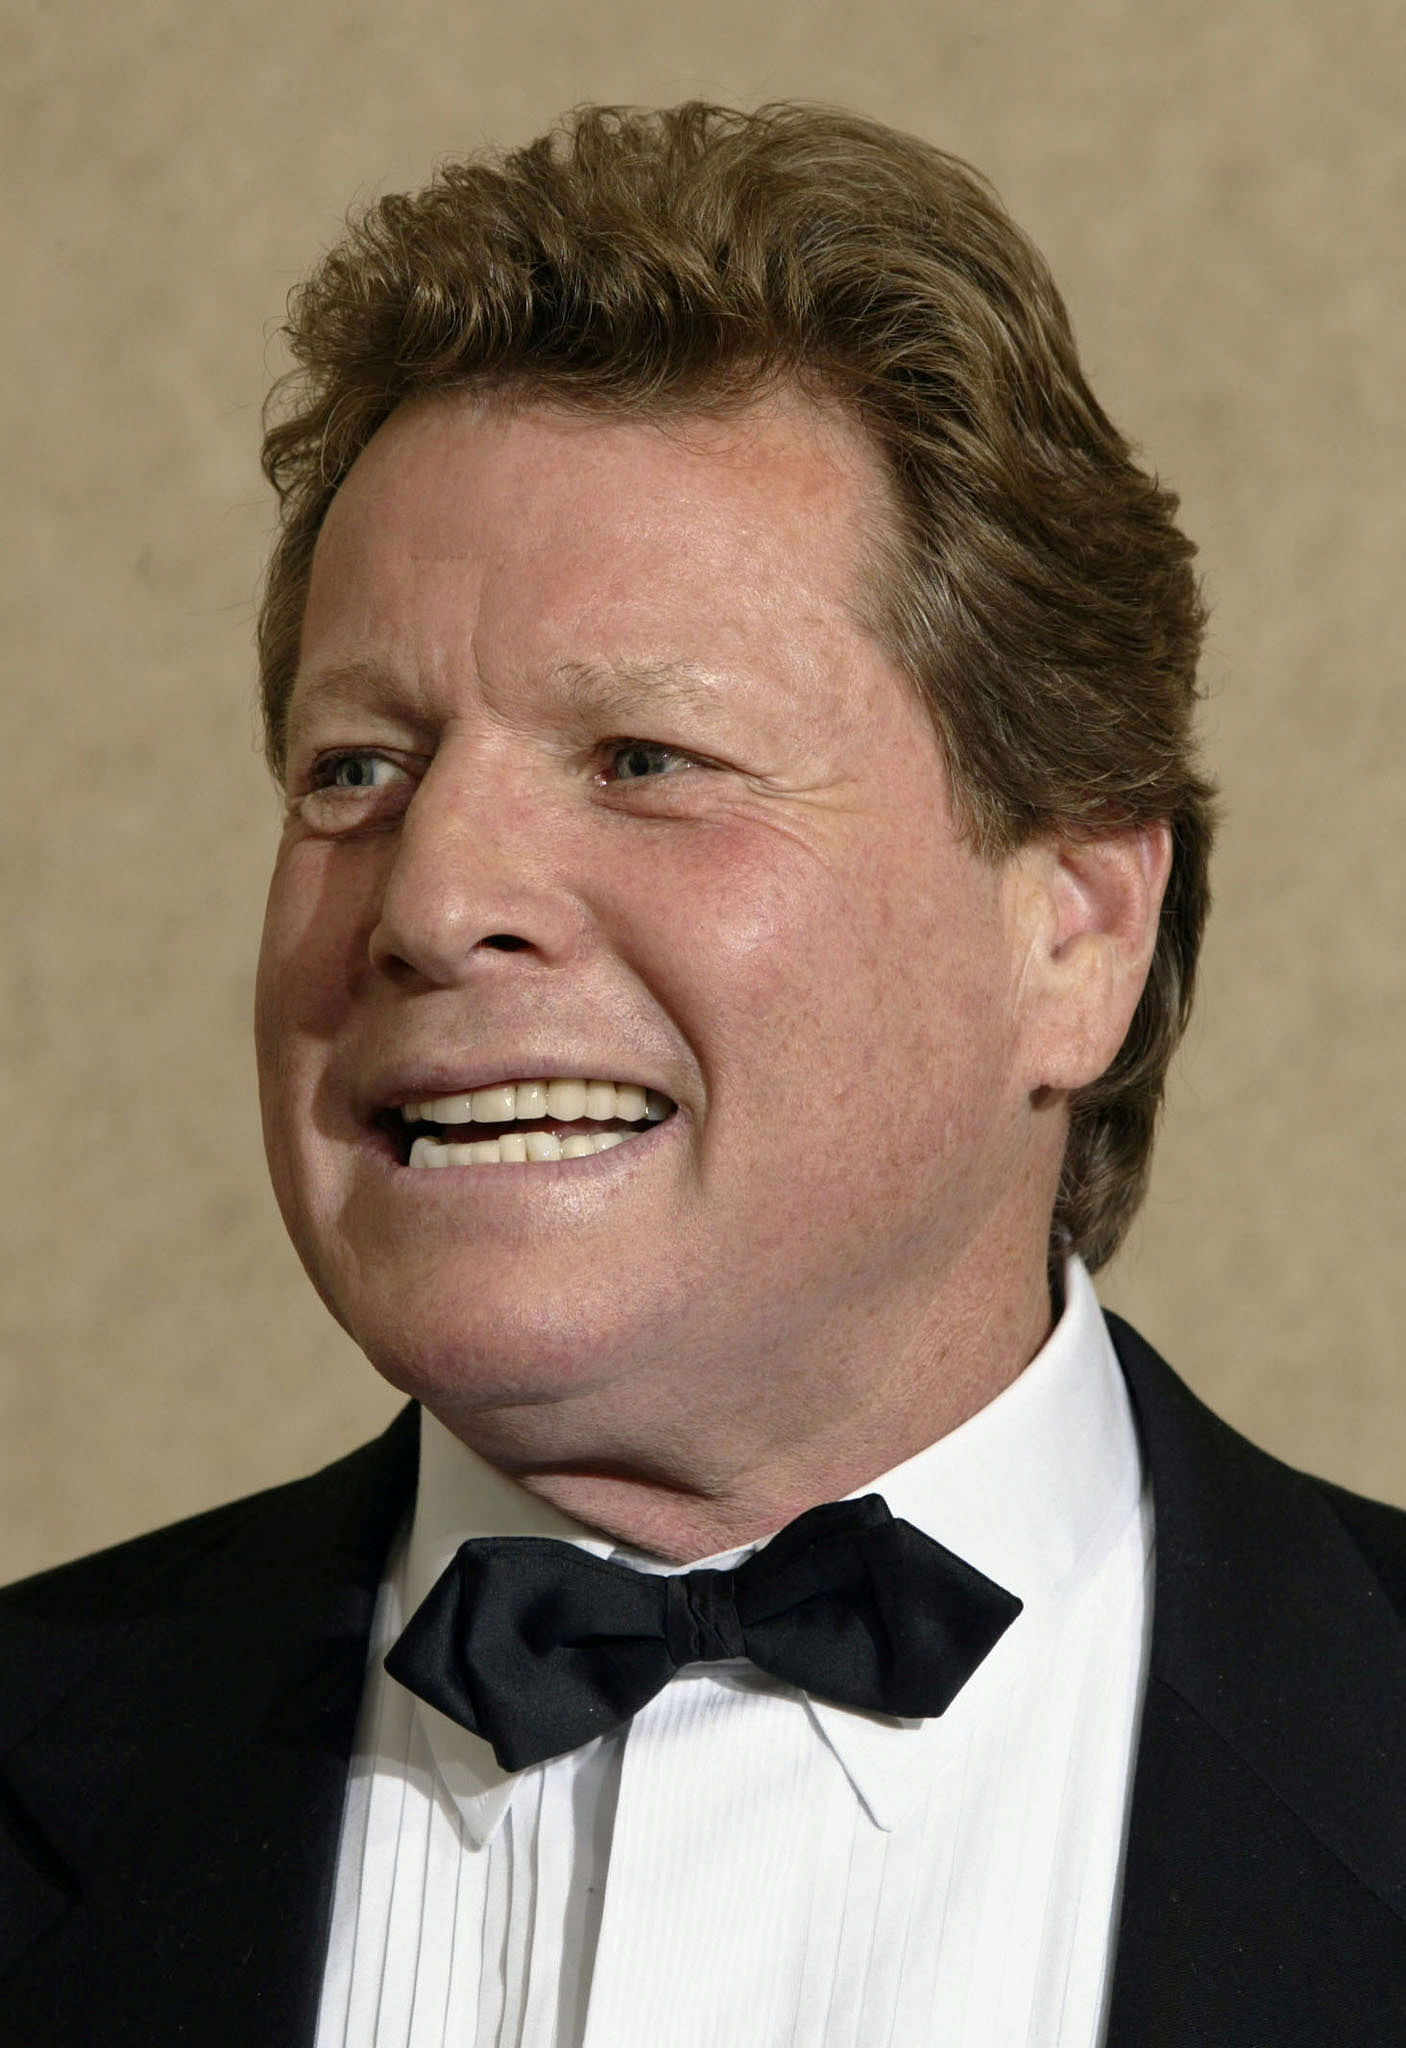 FILE PHOTO: Ryan O'Neal backstage during the 74th annual Academy Awards in Hollywood, March 24, 2002. O'Neal and Ali McGraw who starred in the movie "Love Story" together presented the Jean Hersholt Humanitarian Award to Arthur Hiller, who directed them in the movie. REUTERS/Mike Blake/File Photo